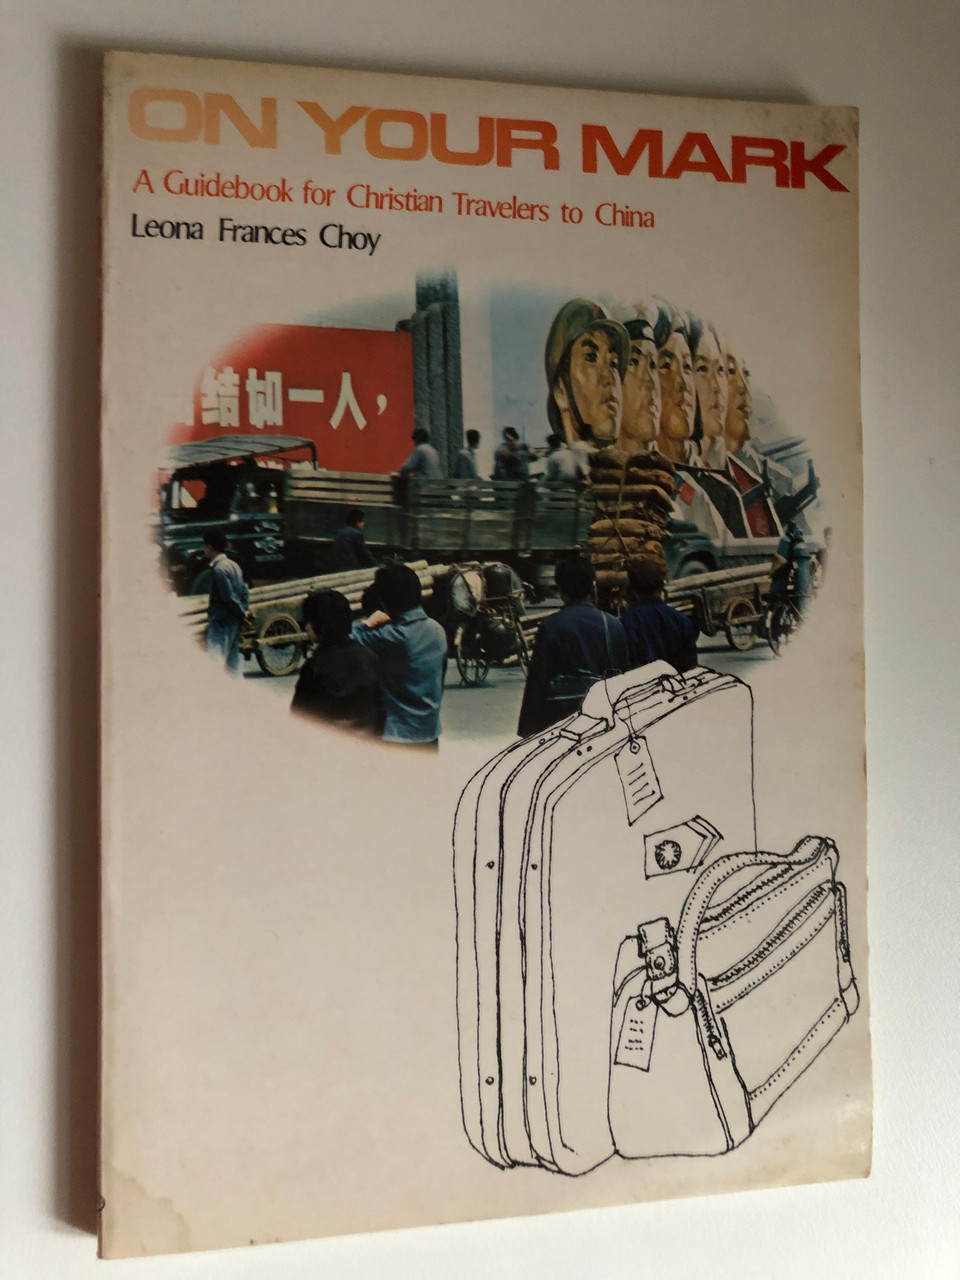 On_Your_Mark_by_Leona_Frances_Choy_A_Guidebook_for_Christian_Travelers_to_China_Introduction_to_Chinas_history_Missionary_background_Published_by_permission_of_Mrs._L_1__19509.1690605268.1280.1280.JPG (960×1280)